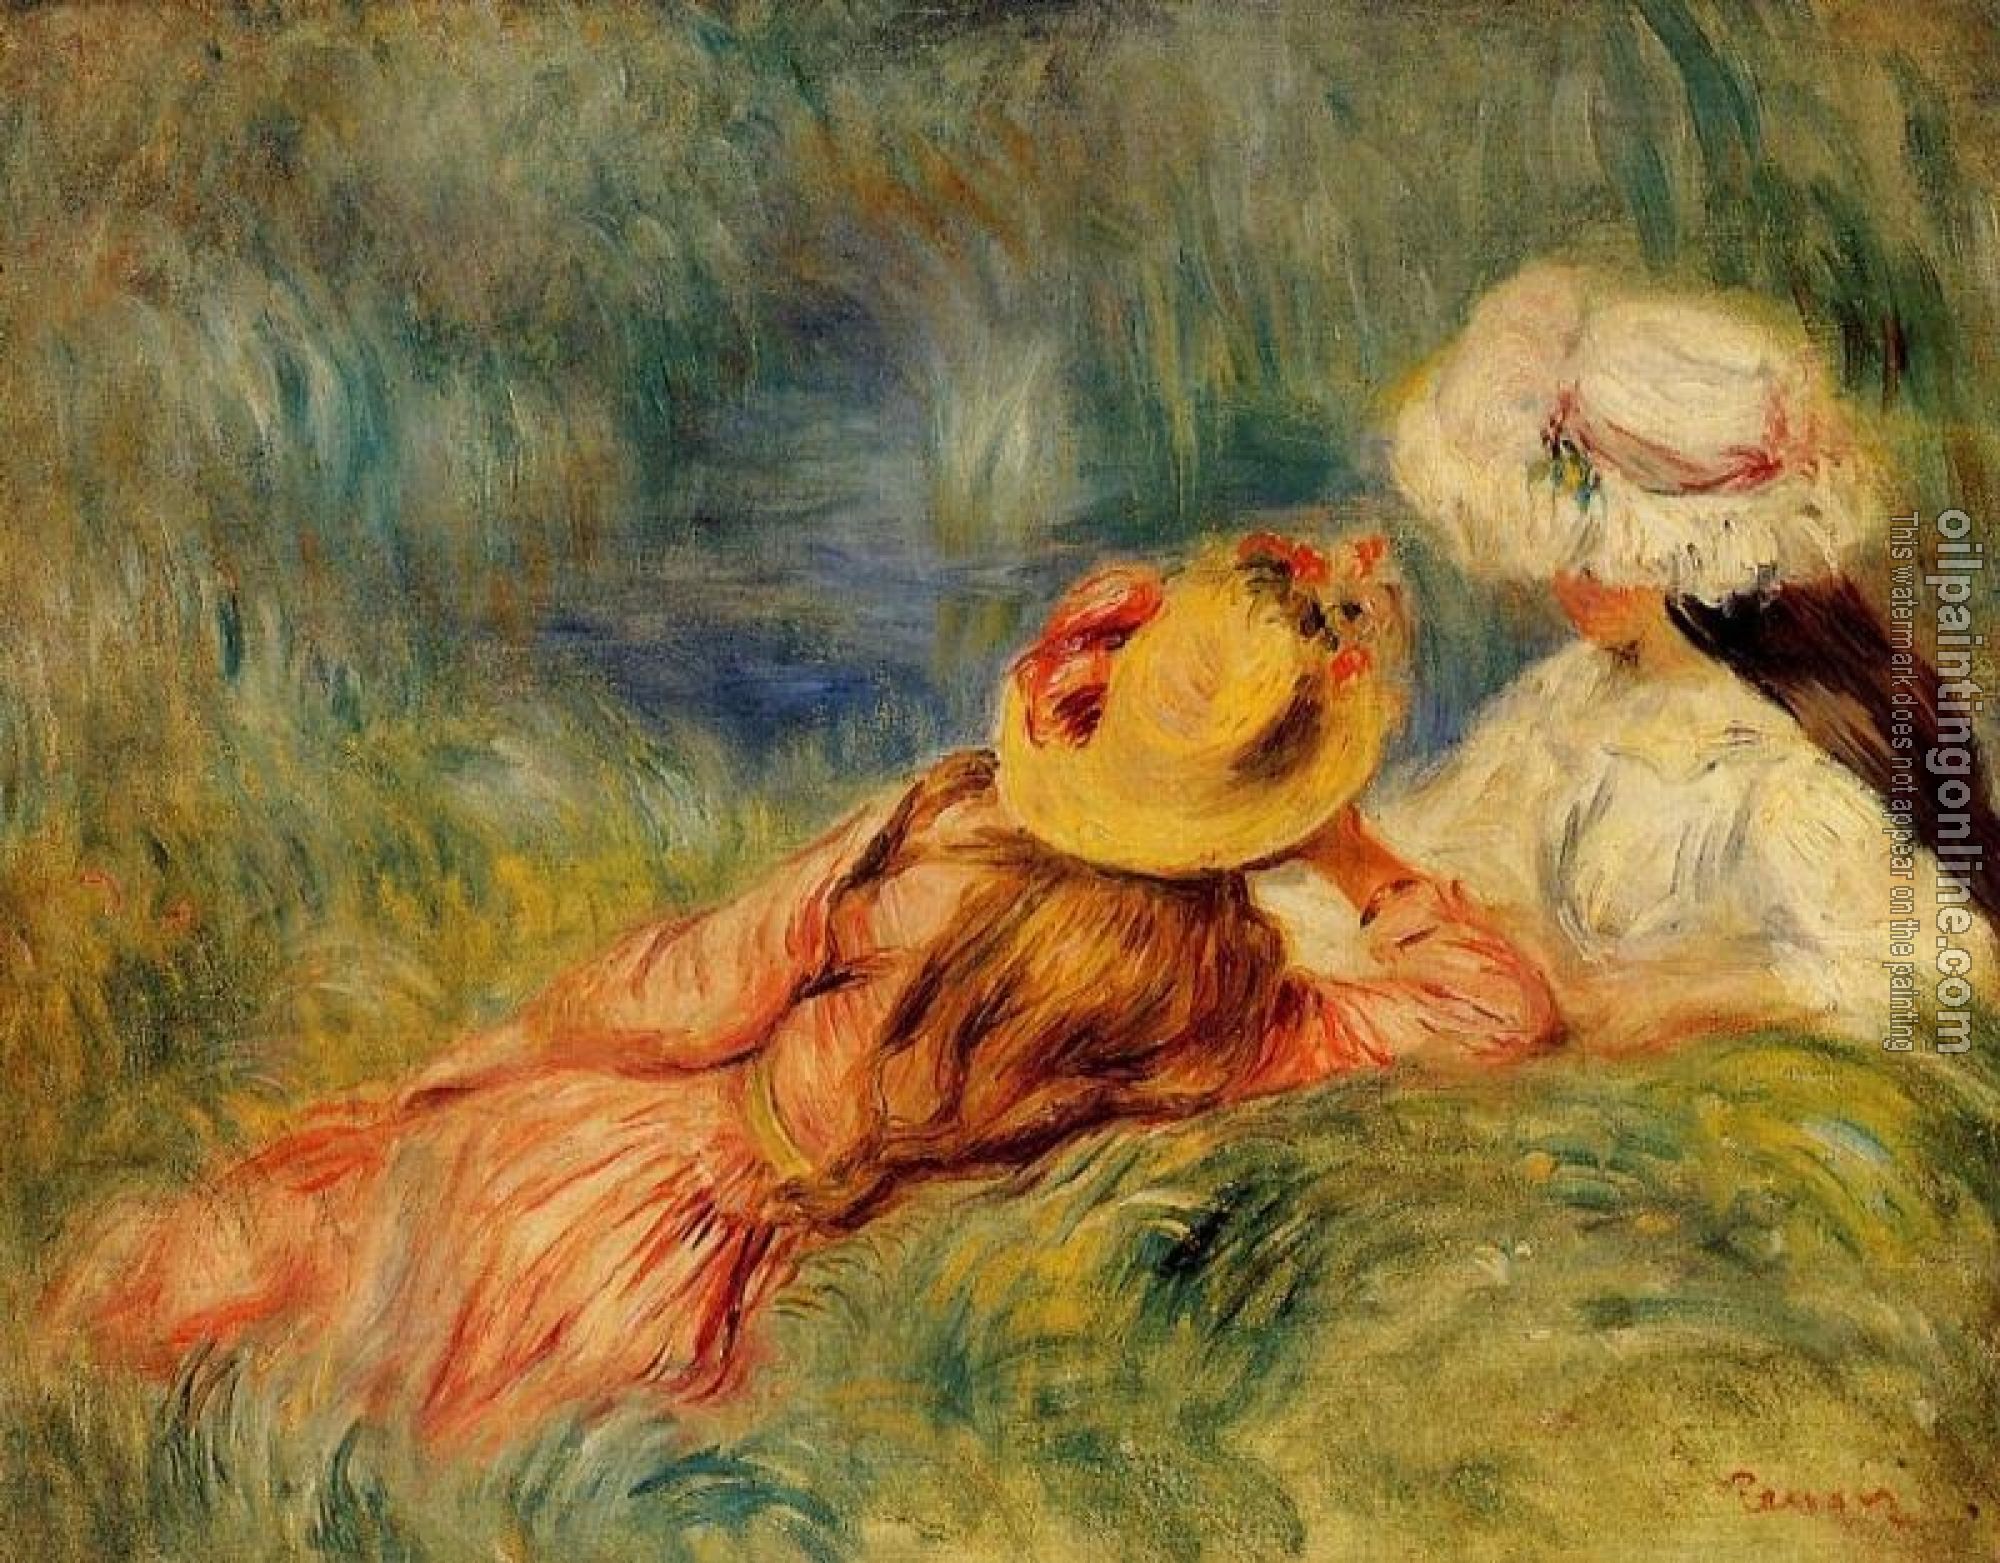 Renoir, Pierre Auguste - Young Girls by the Water